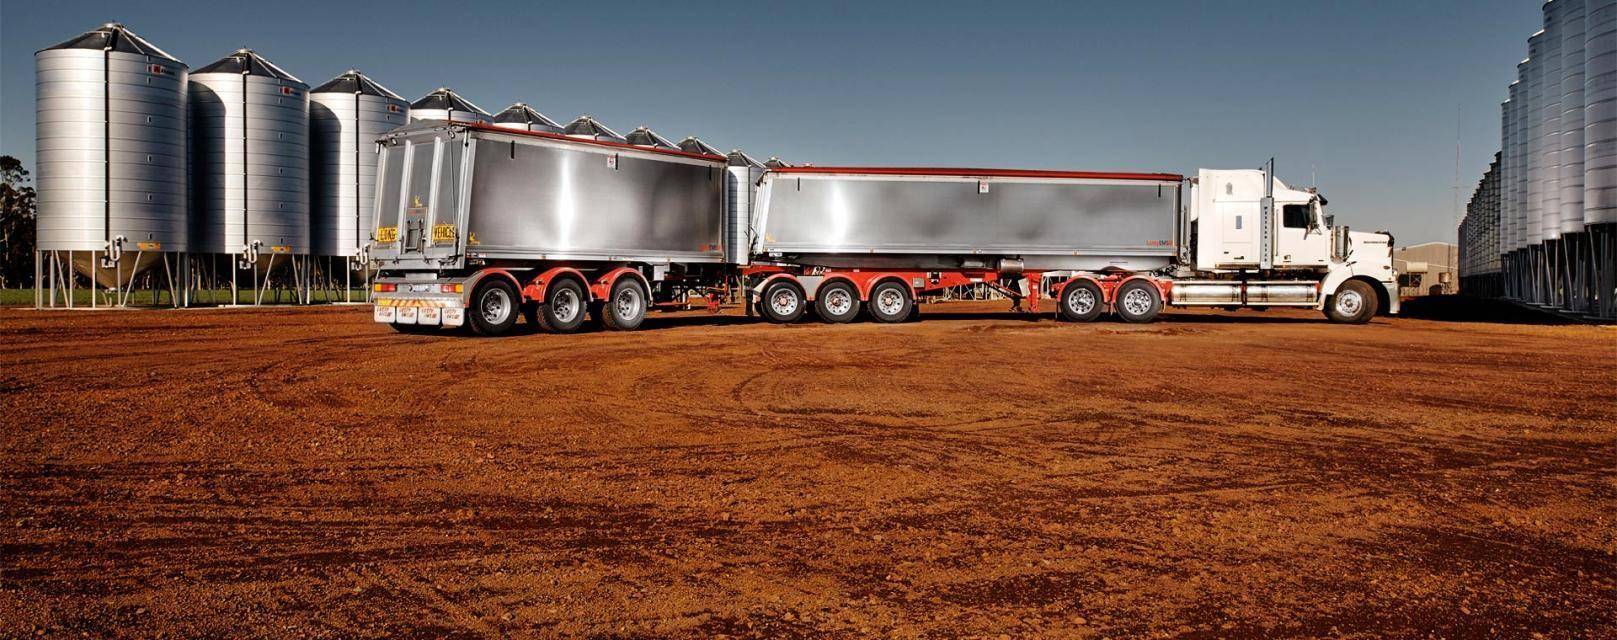 Agriculture Trailers